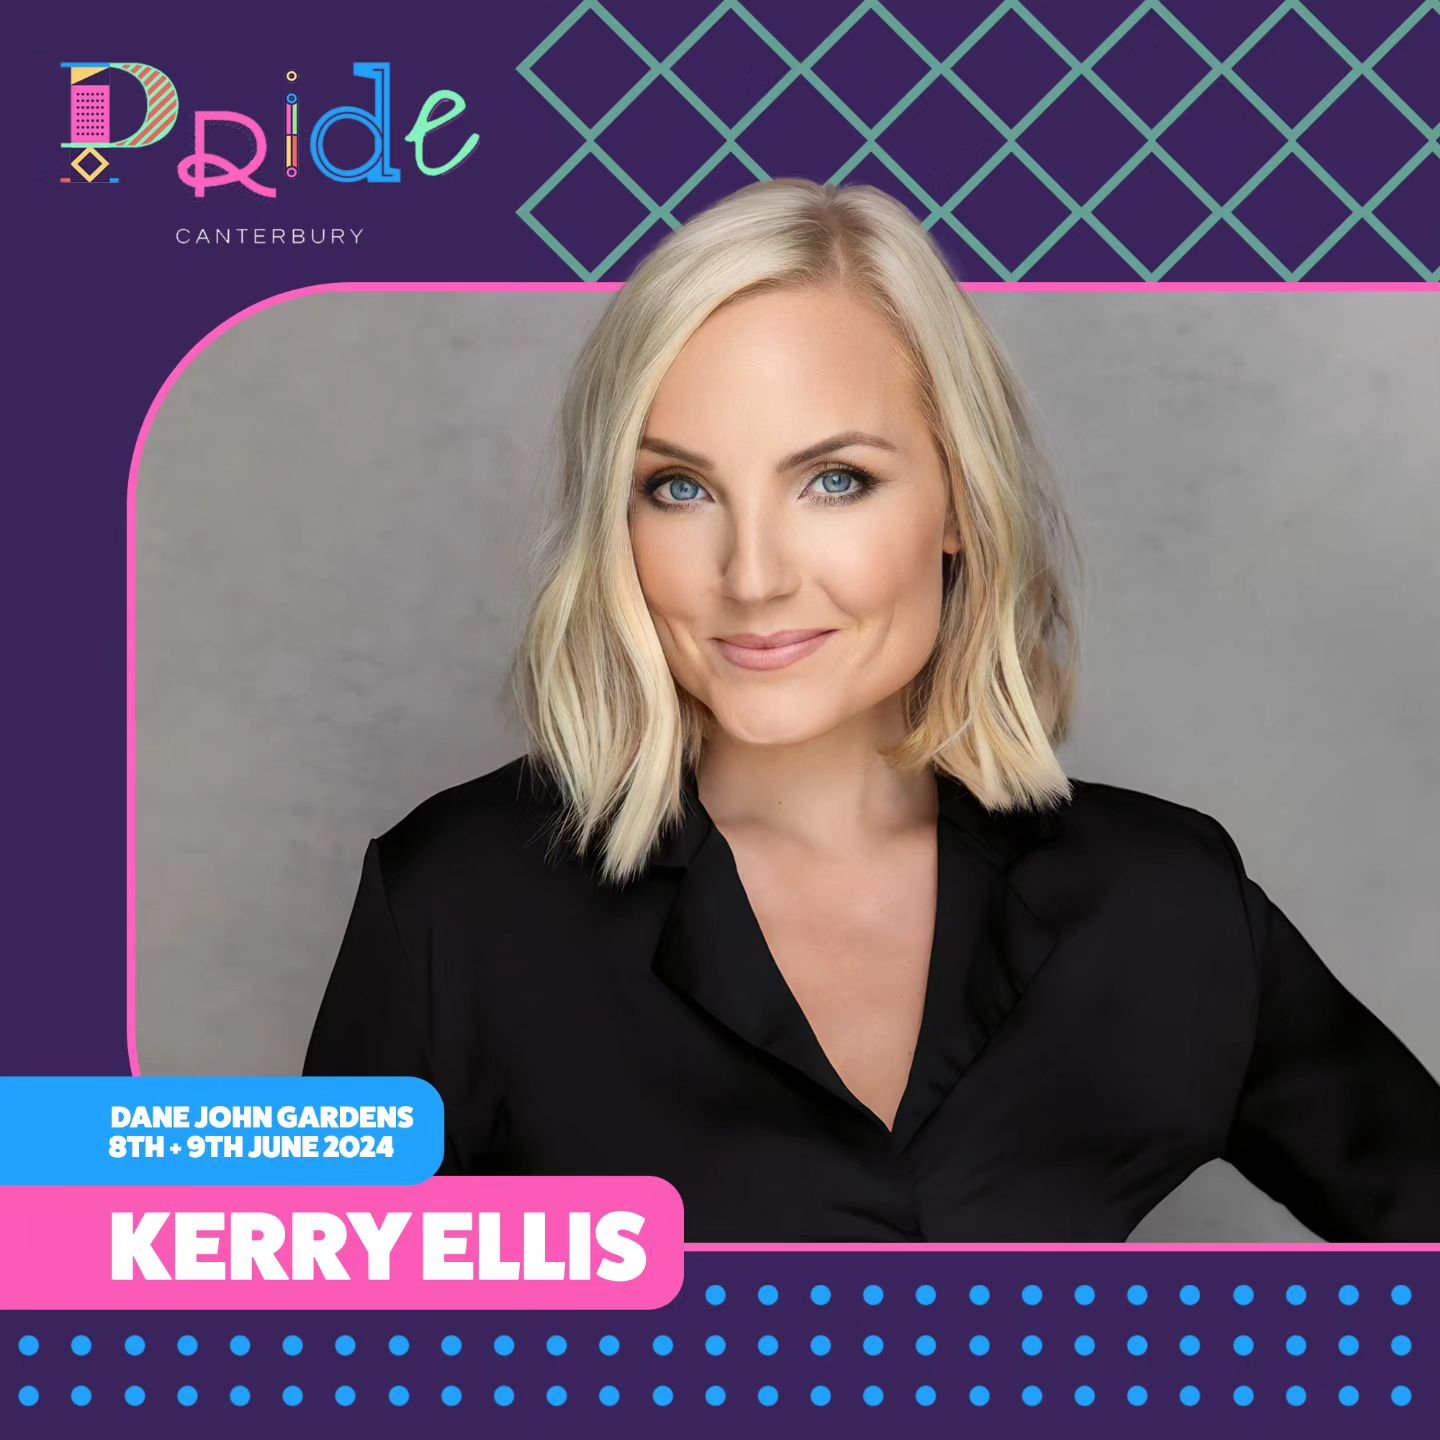 📢 Pride Canterbury line-up announcement 

@kerryellis79 
Kerry played Elphaba in Wicked The Musical on Broadway and in the West End. She has a whole host of other musical credits to her name including We Will Rock You and Cats. We can't wait to see 